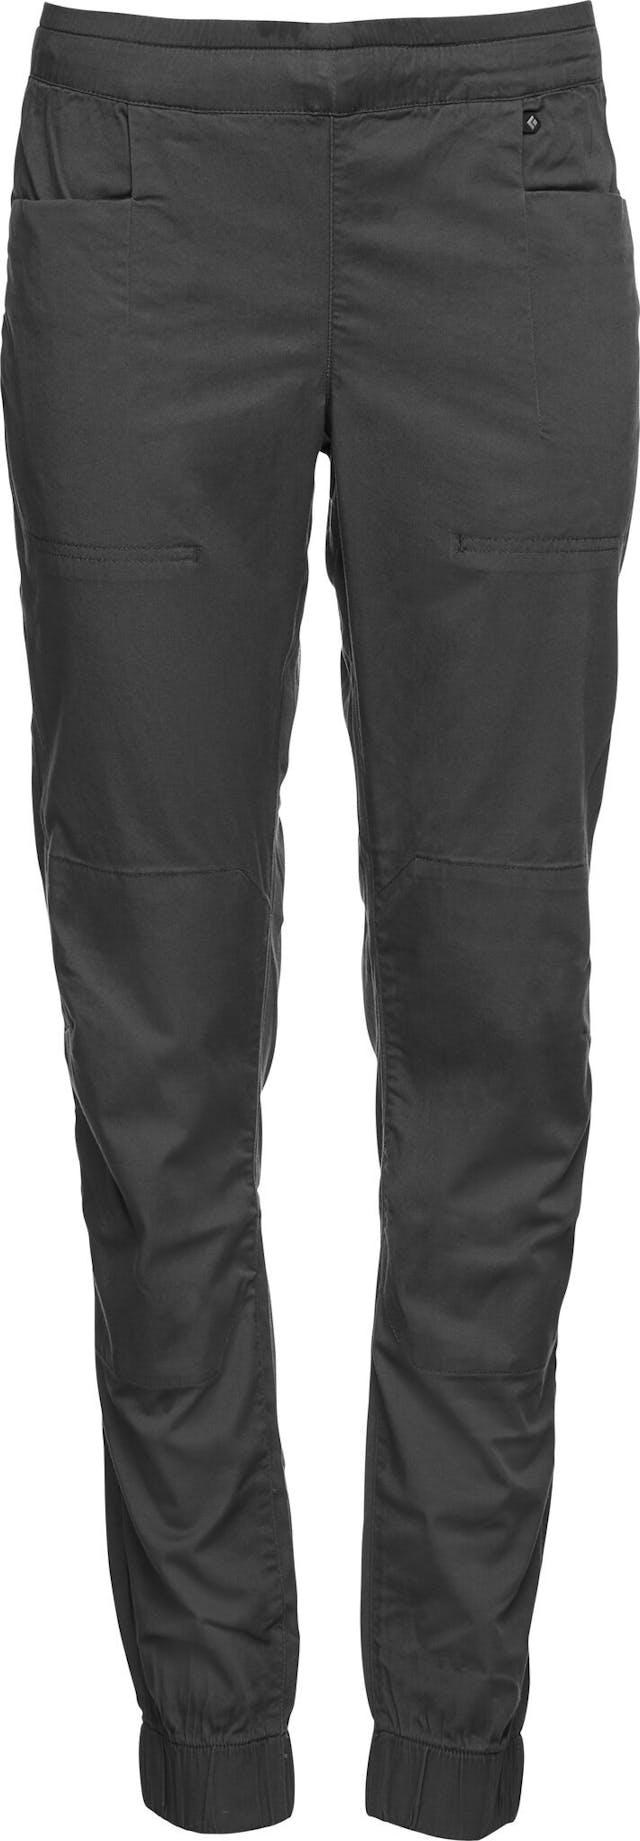 Product image for Notion SP Pants - Women's